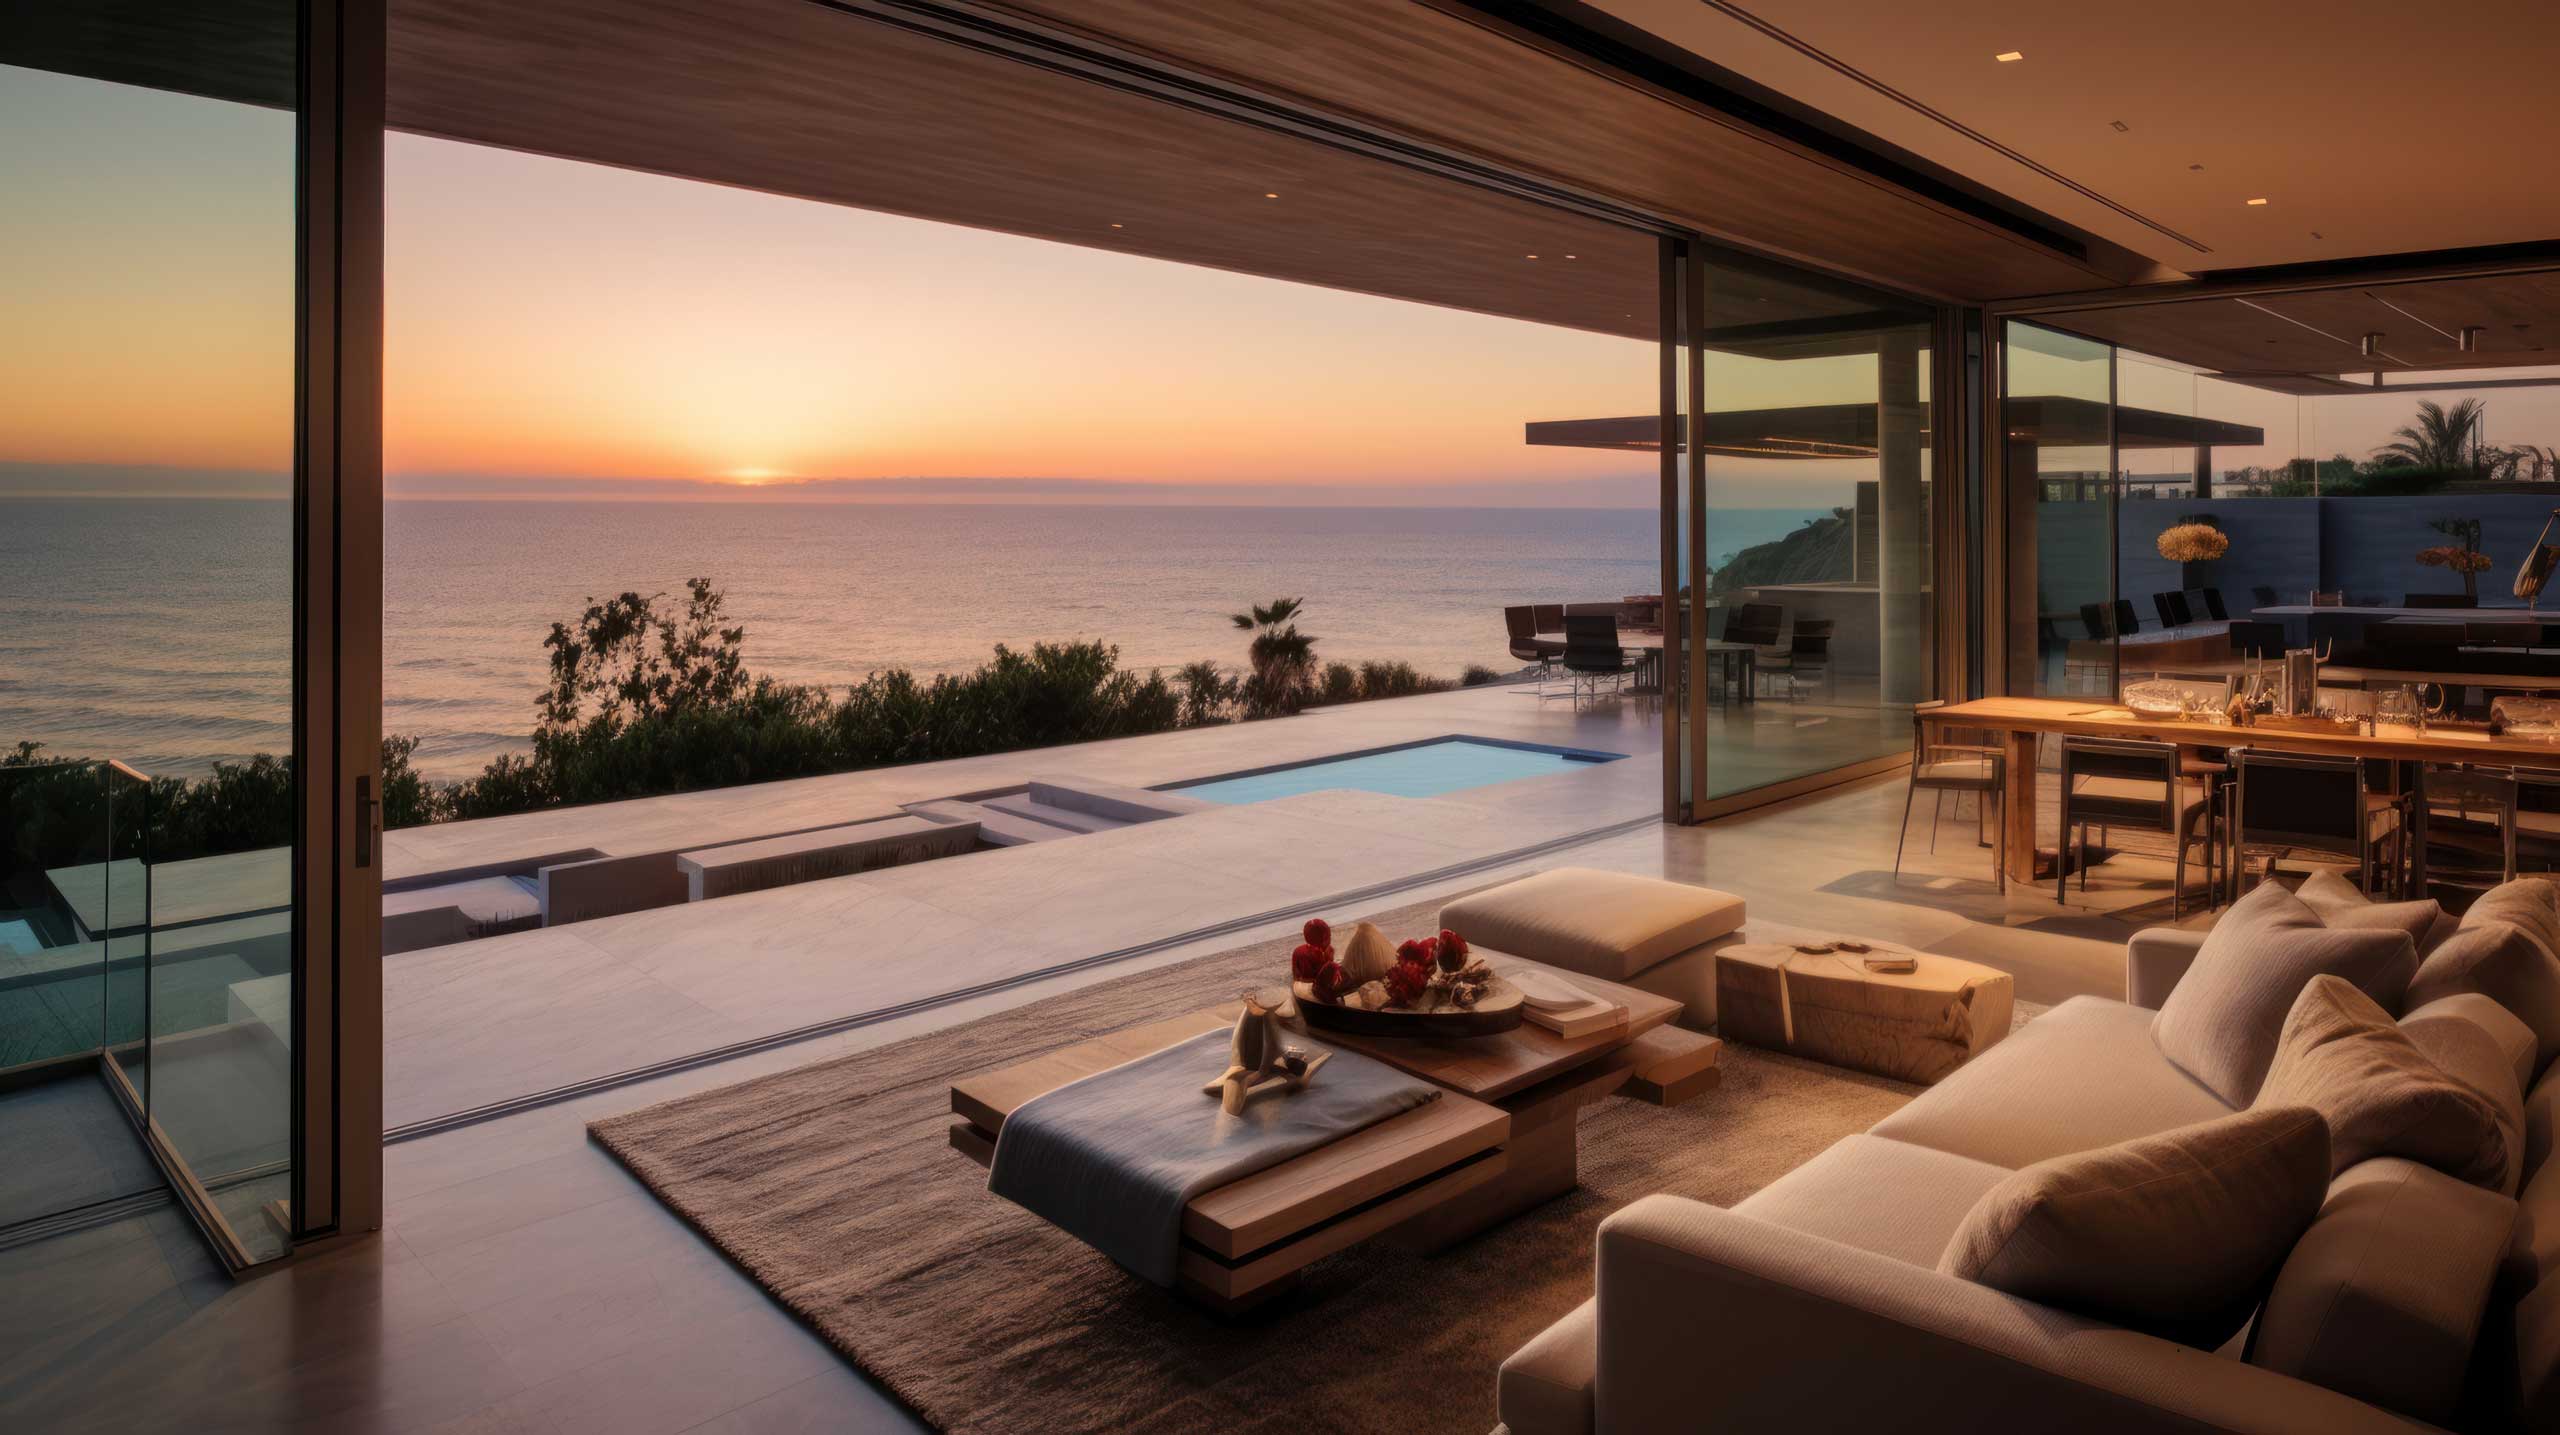 Interior view of a luxurious living room with expansive glass windows showcasing a sunset over the ocean and an outdoor pool.